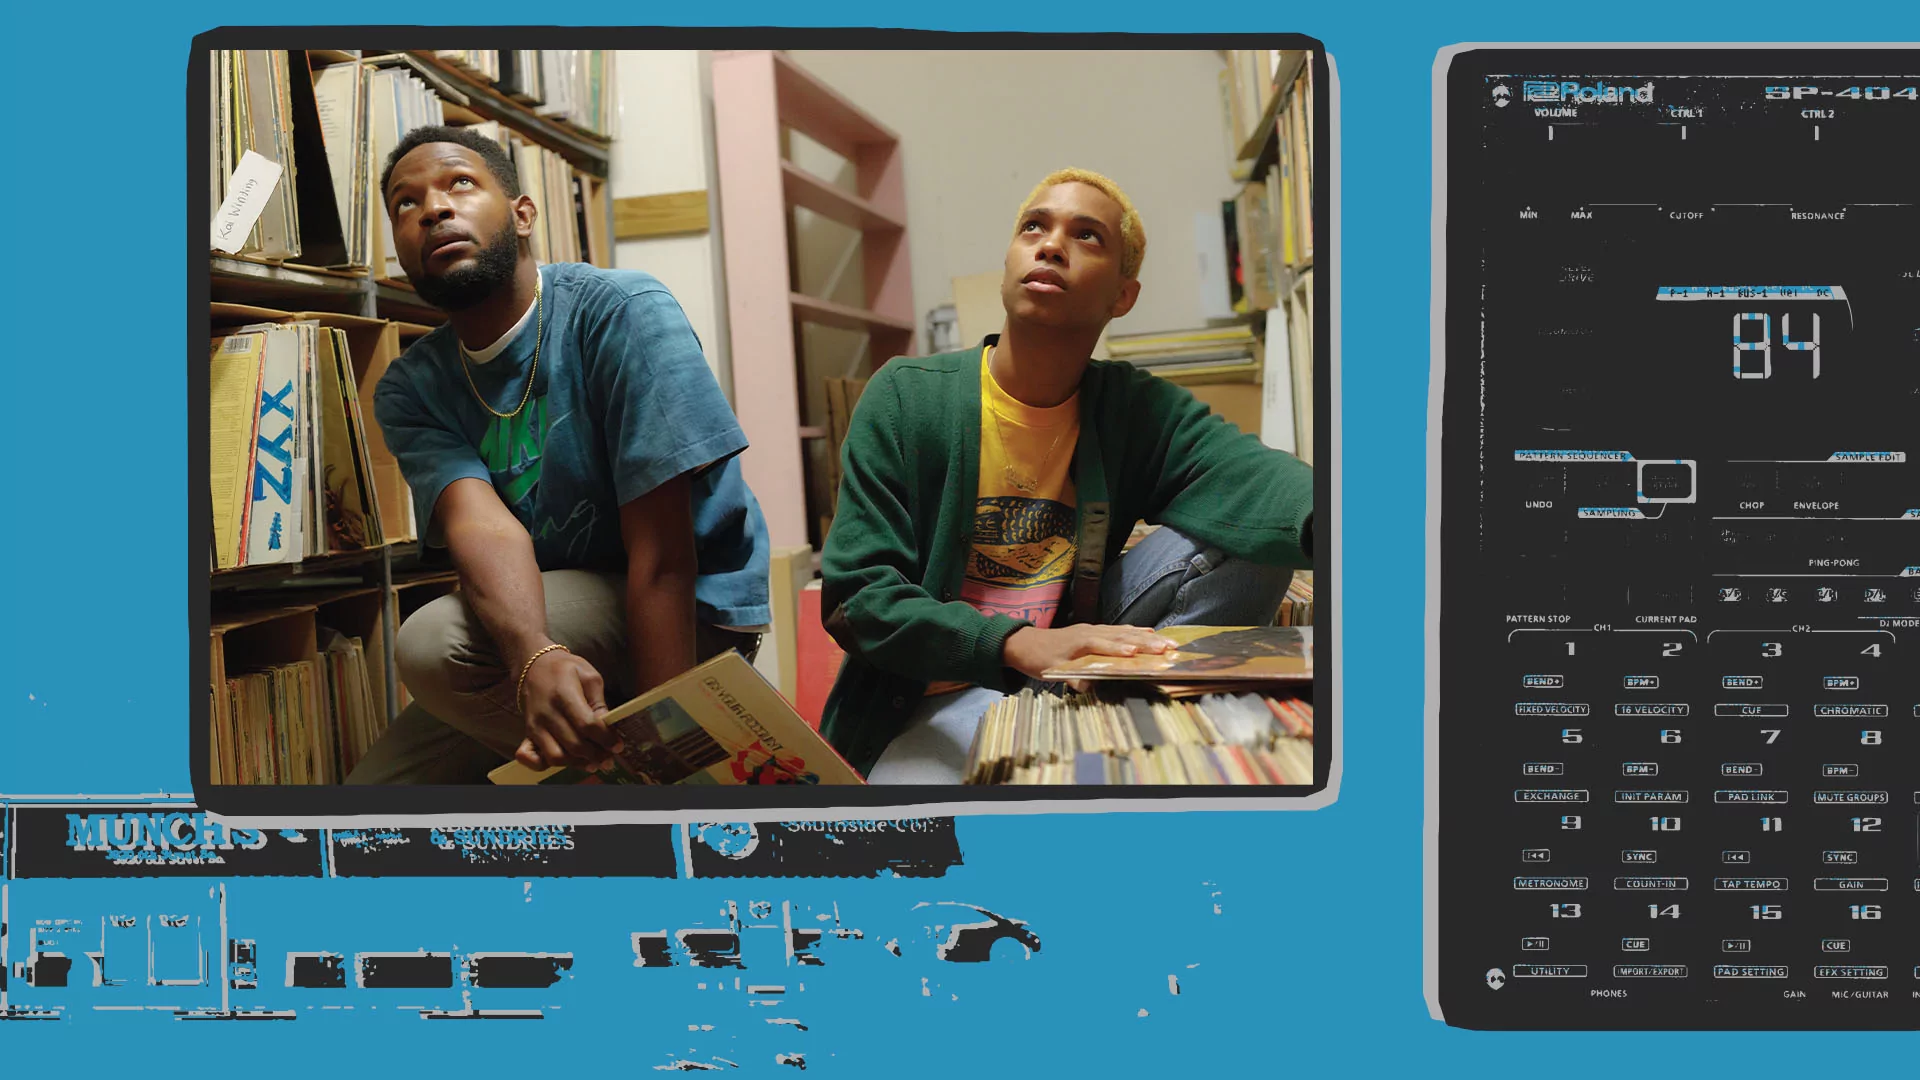 An image of Andre Gainey and Vonne Parks crouched amongst the shelves of a record store on a blue backdrop next to an illustration of an SP-404 Sampler